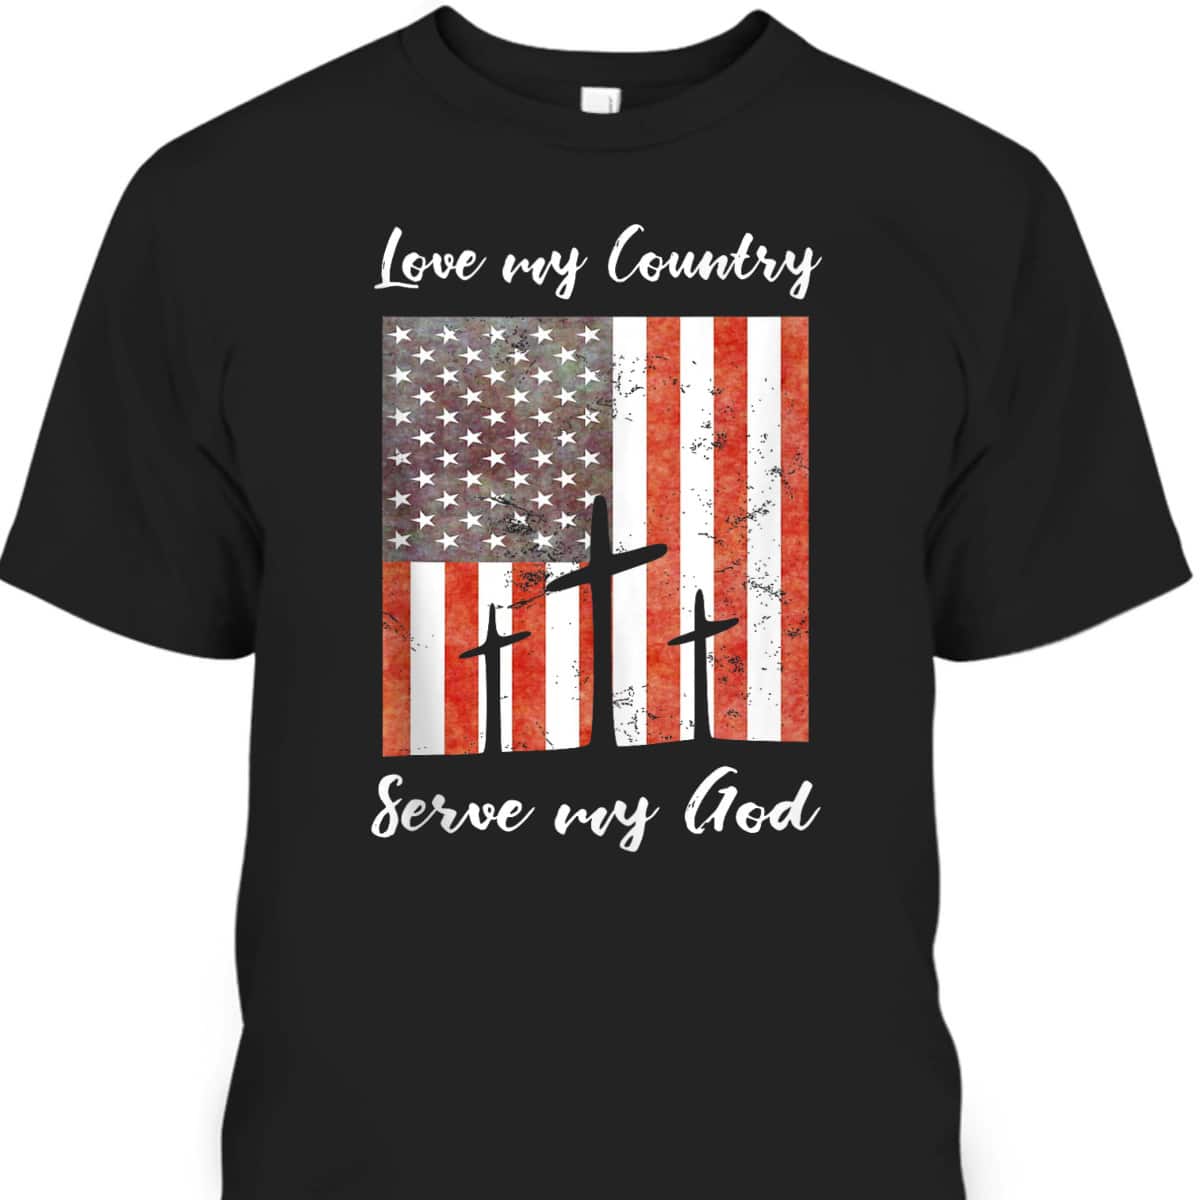 Christian 4th July Patriotic Christianity Quote Love My Country Serve My God T-Shirt